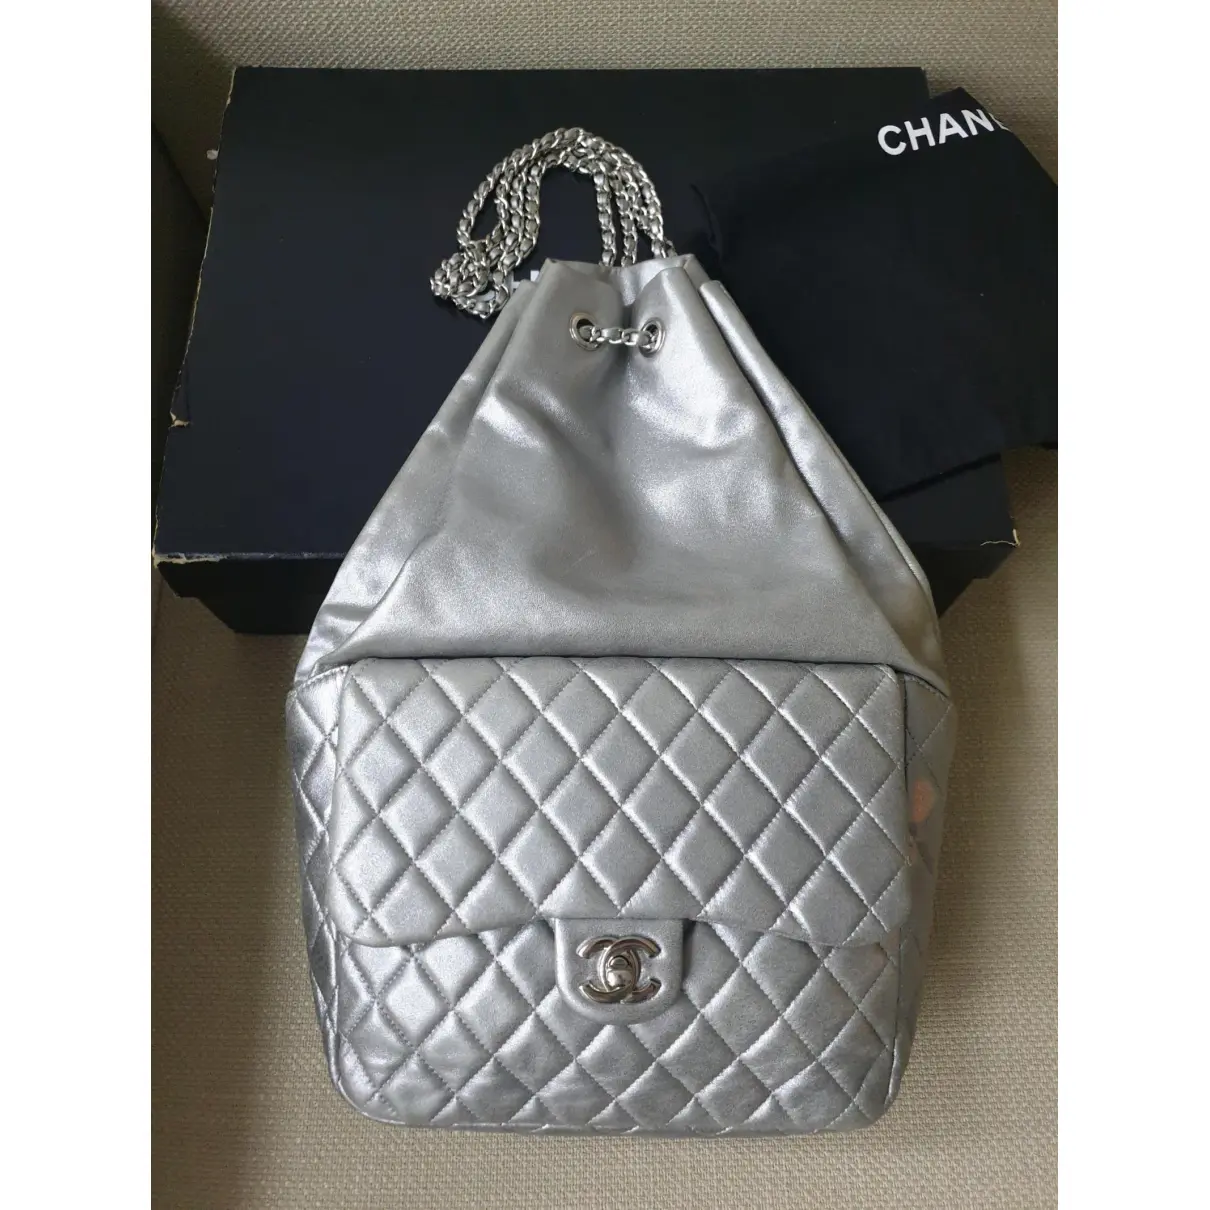 Timeless/Classique Chain leather backpack Chanel